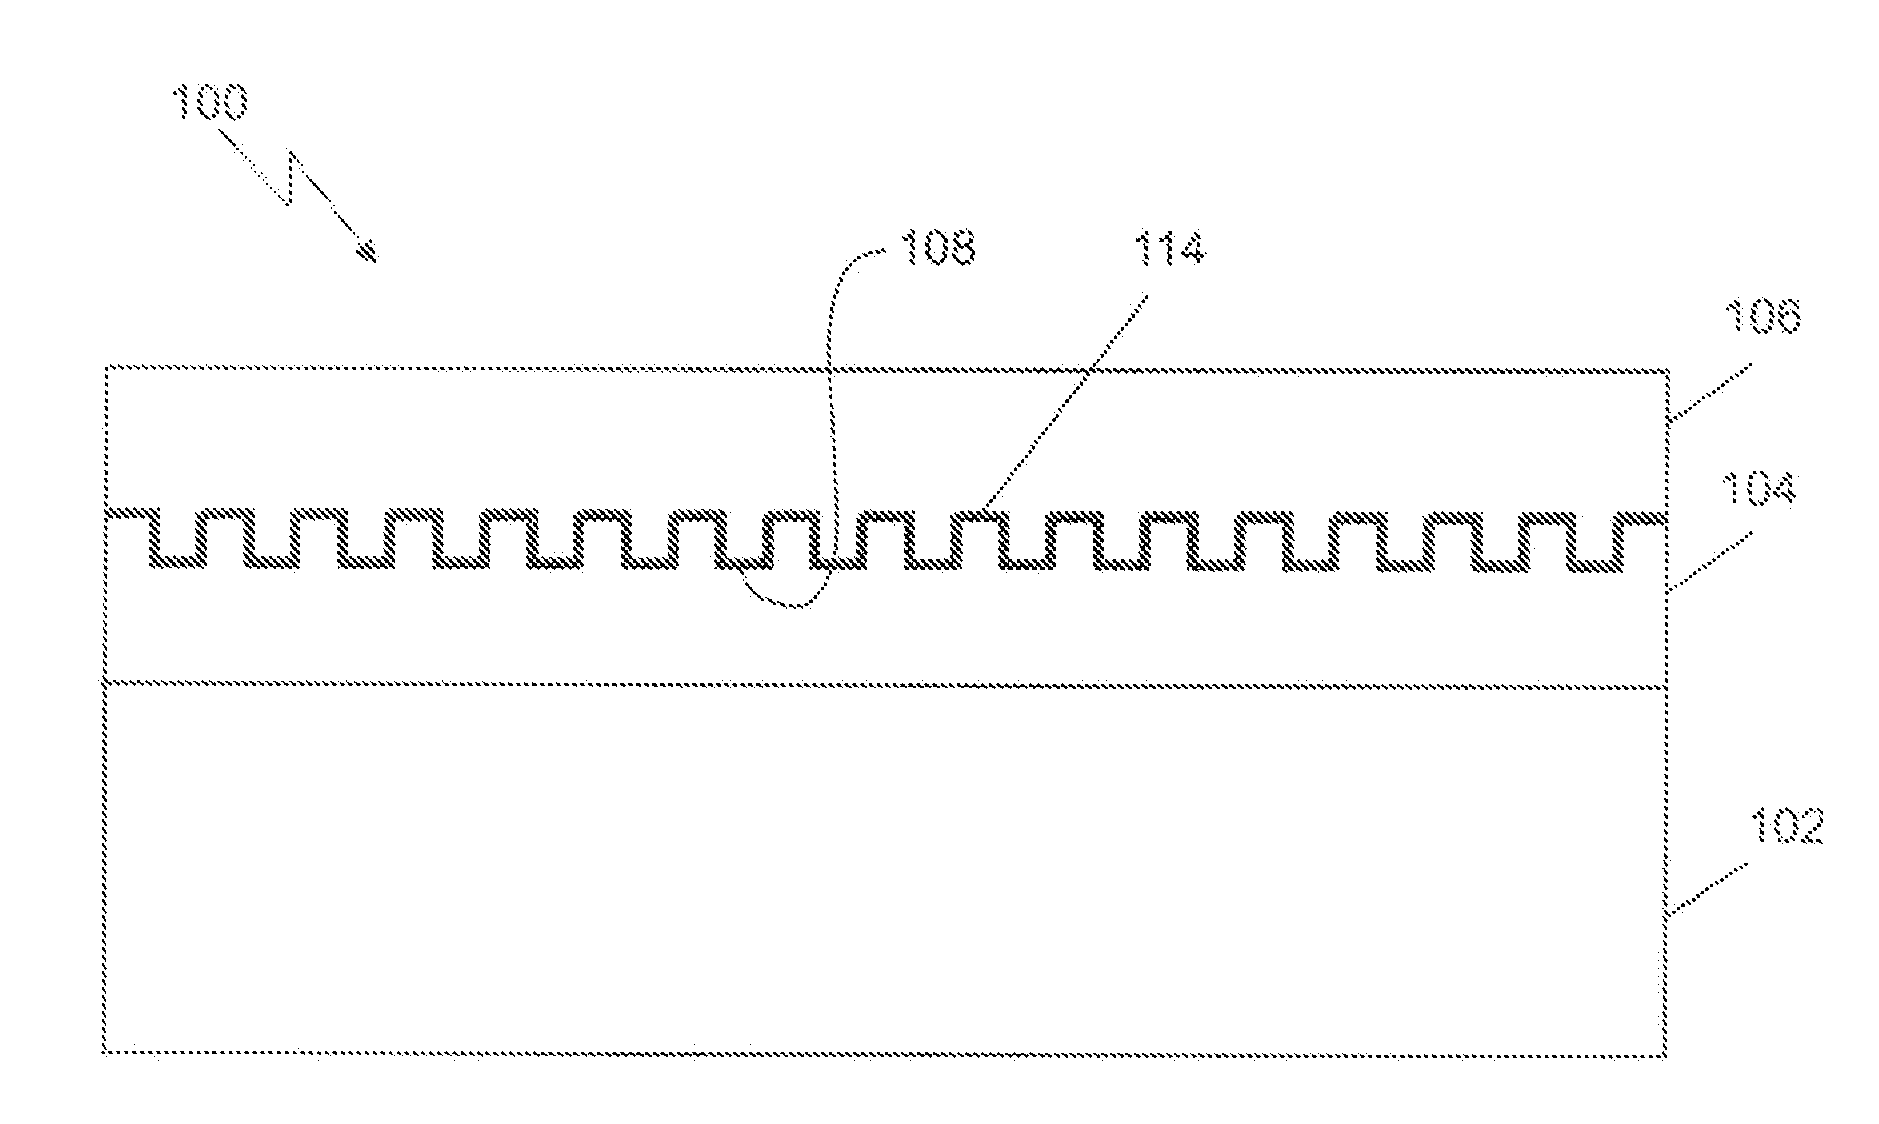 Corrugated interfaces for multilayered interconnects